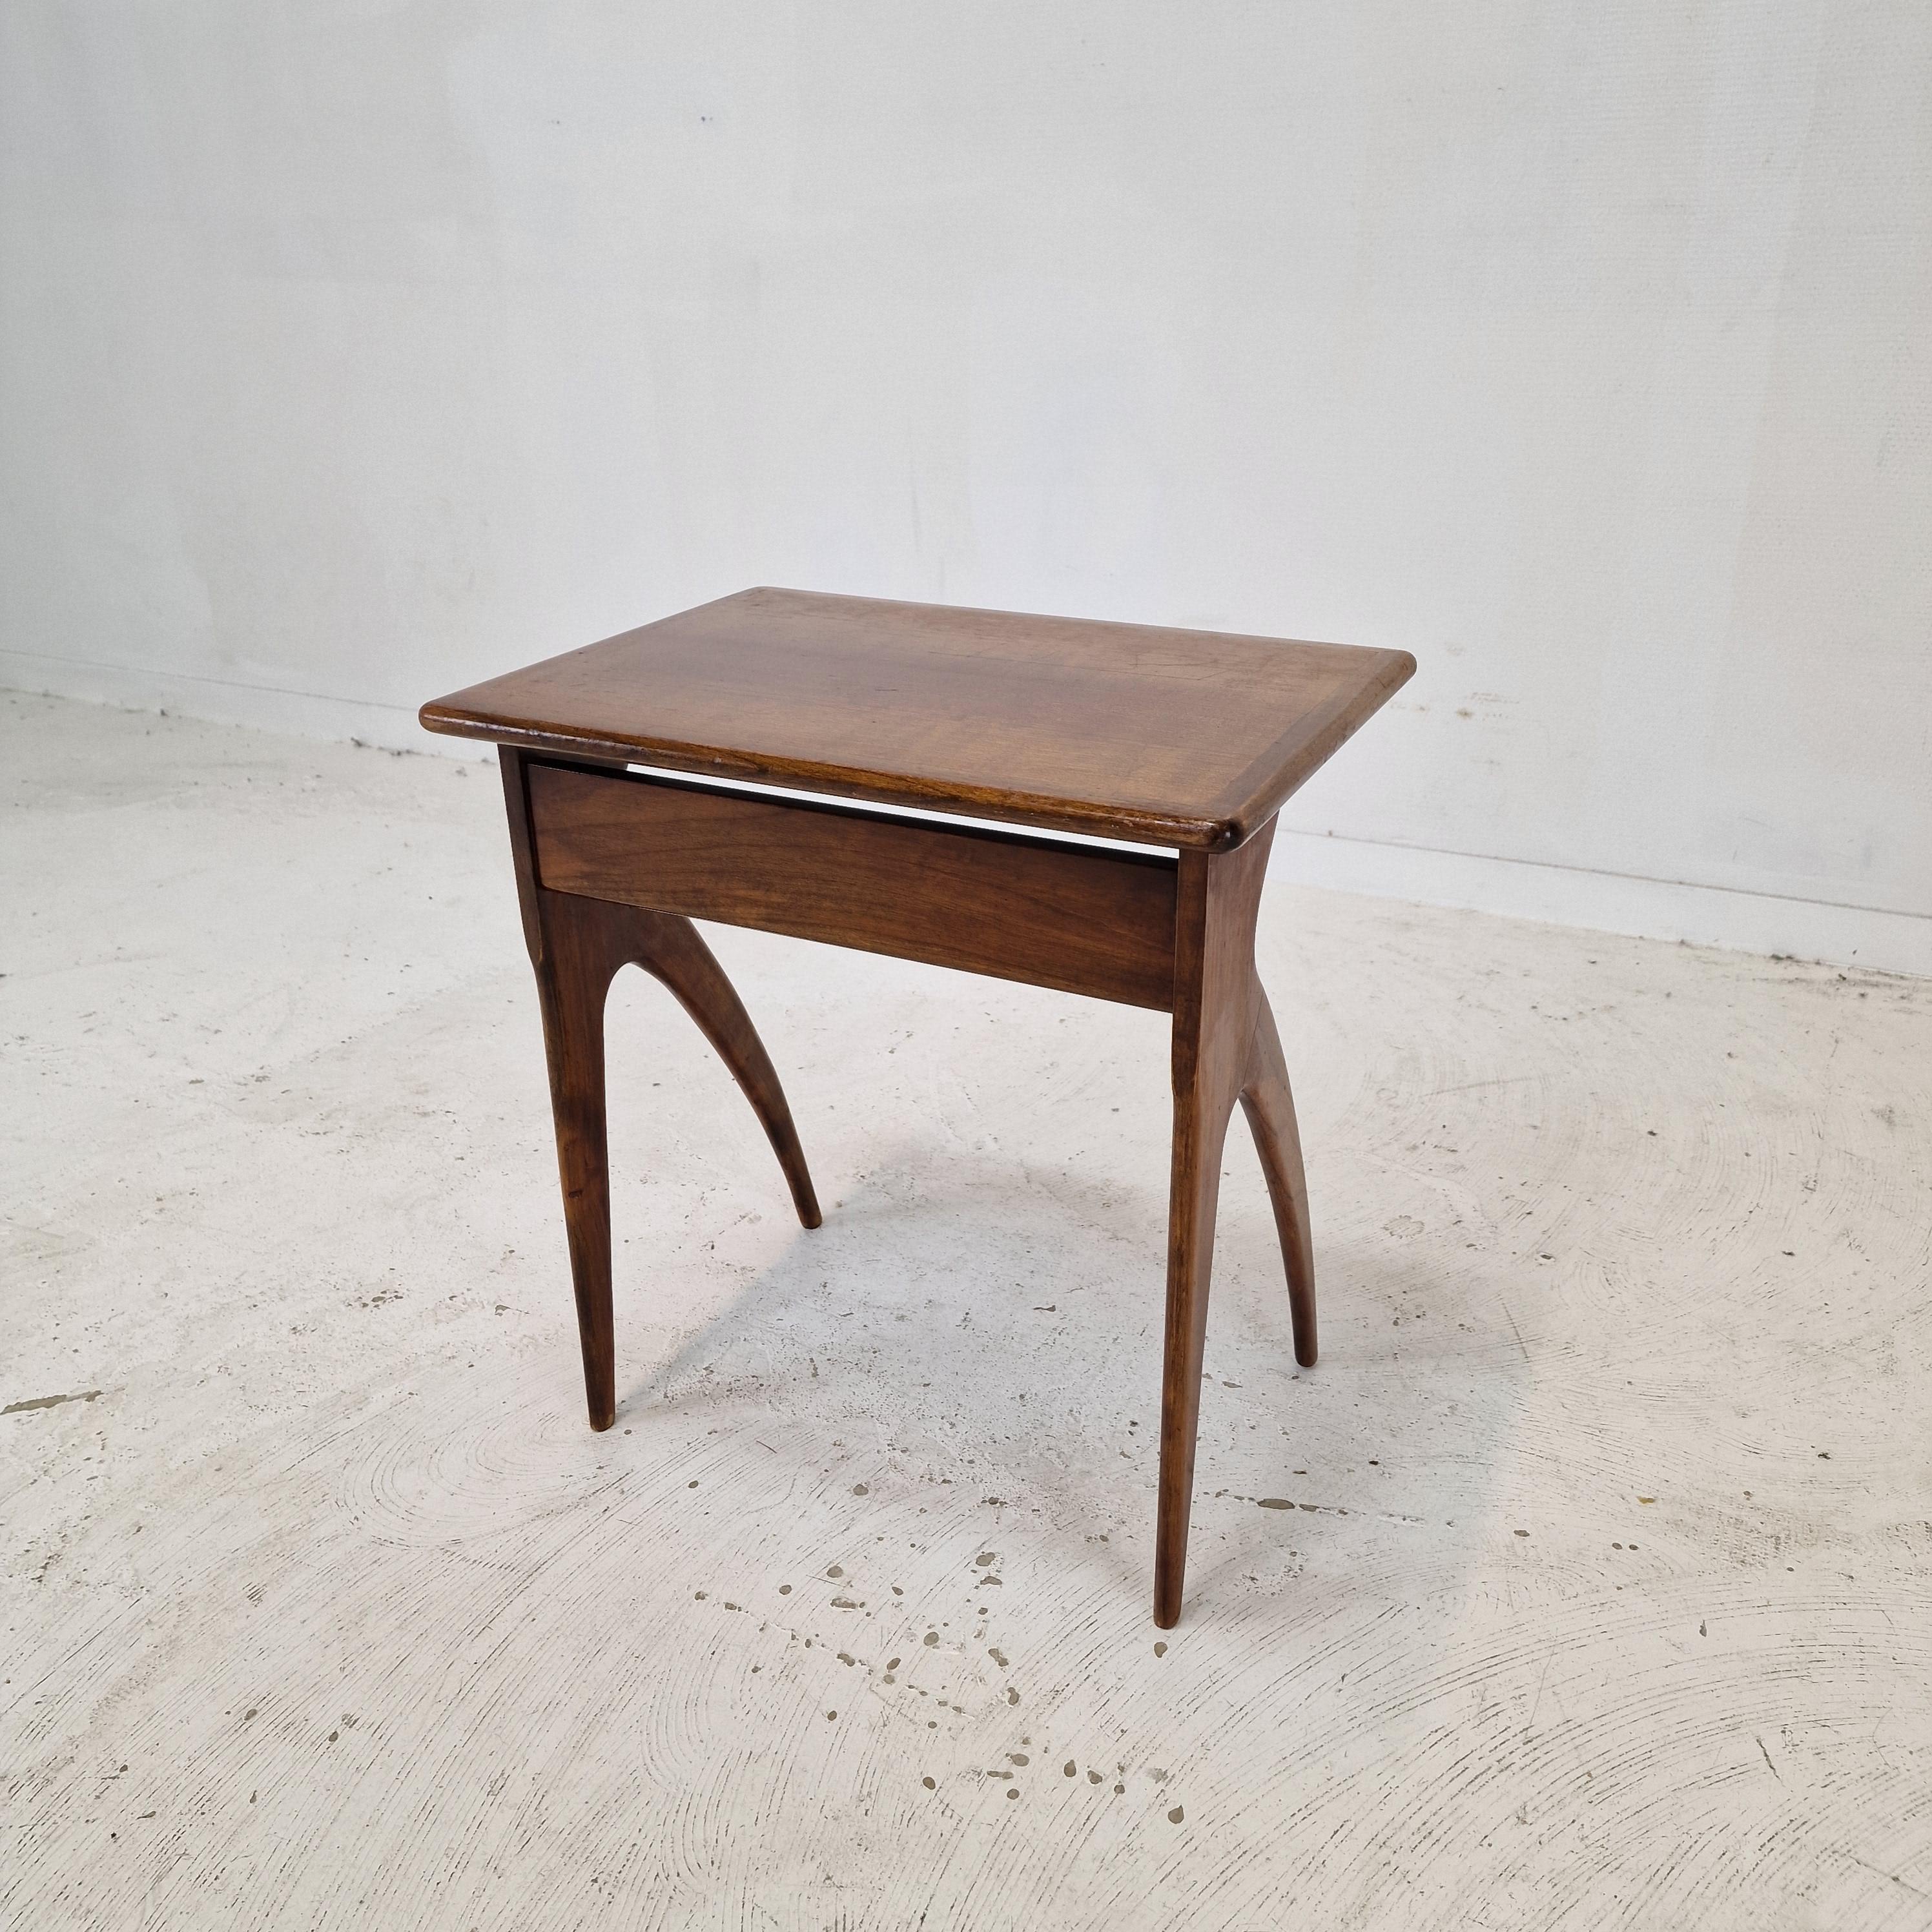 Italian Wooden Side Table, 1930s For Sale 7